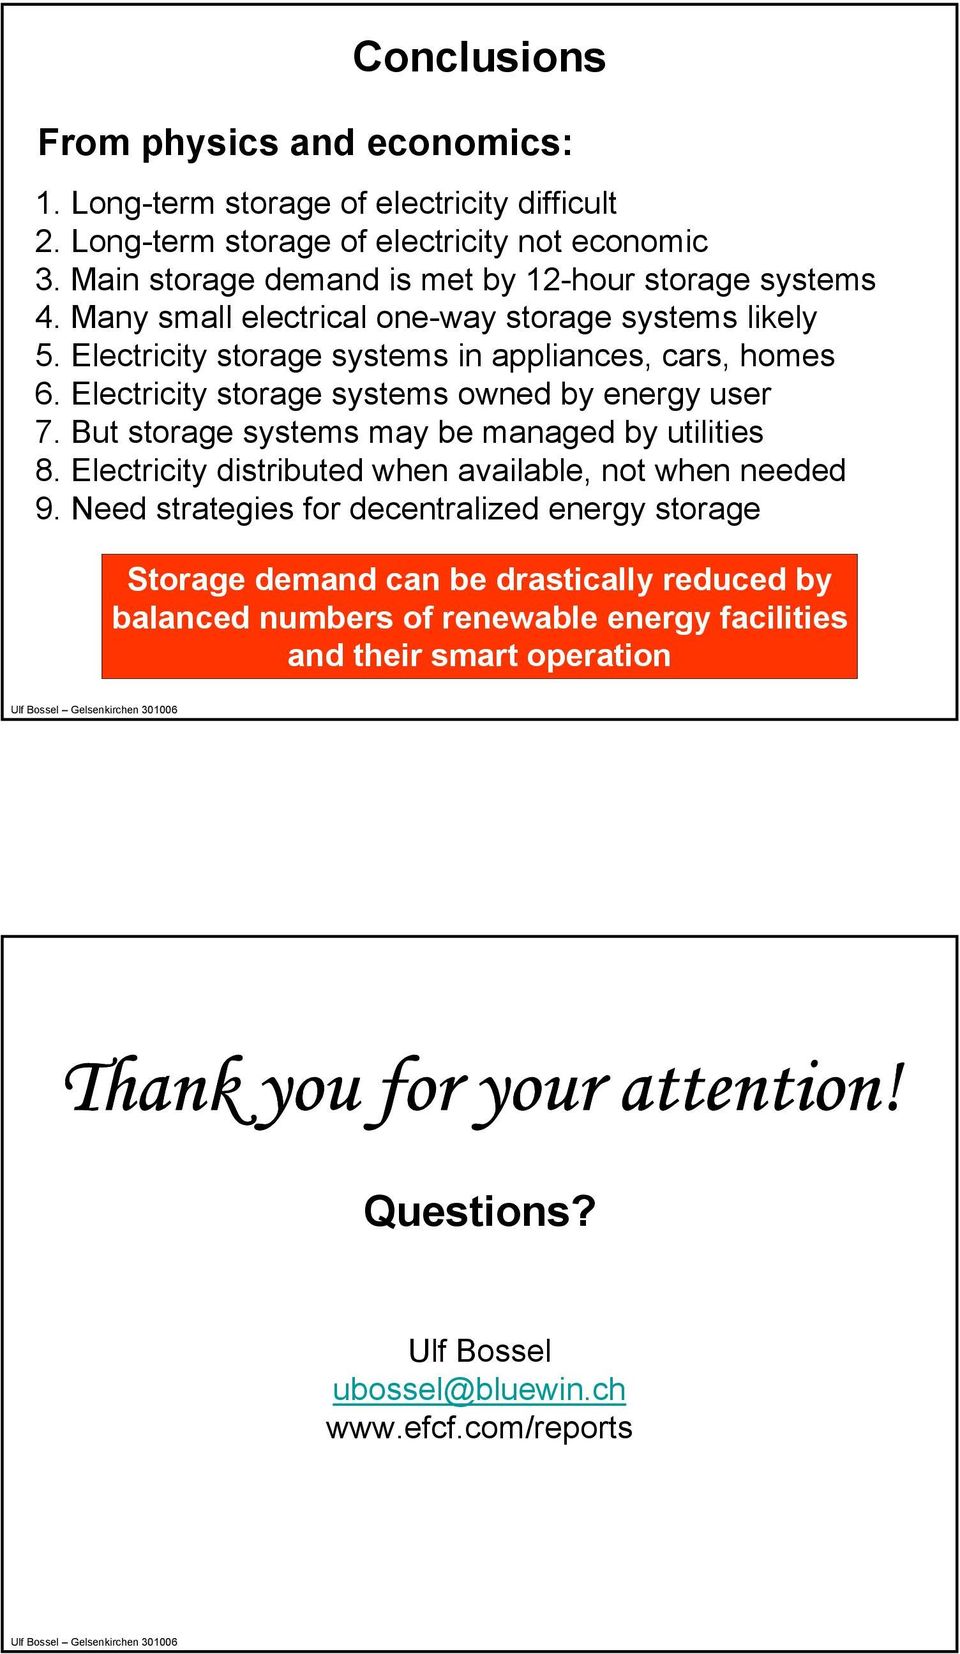 Electricity storage systems owned by energy user 7. But storage systems may be managed by utilities 8. Electricity distributed when available, not when needed 9.